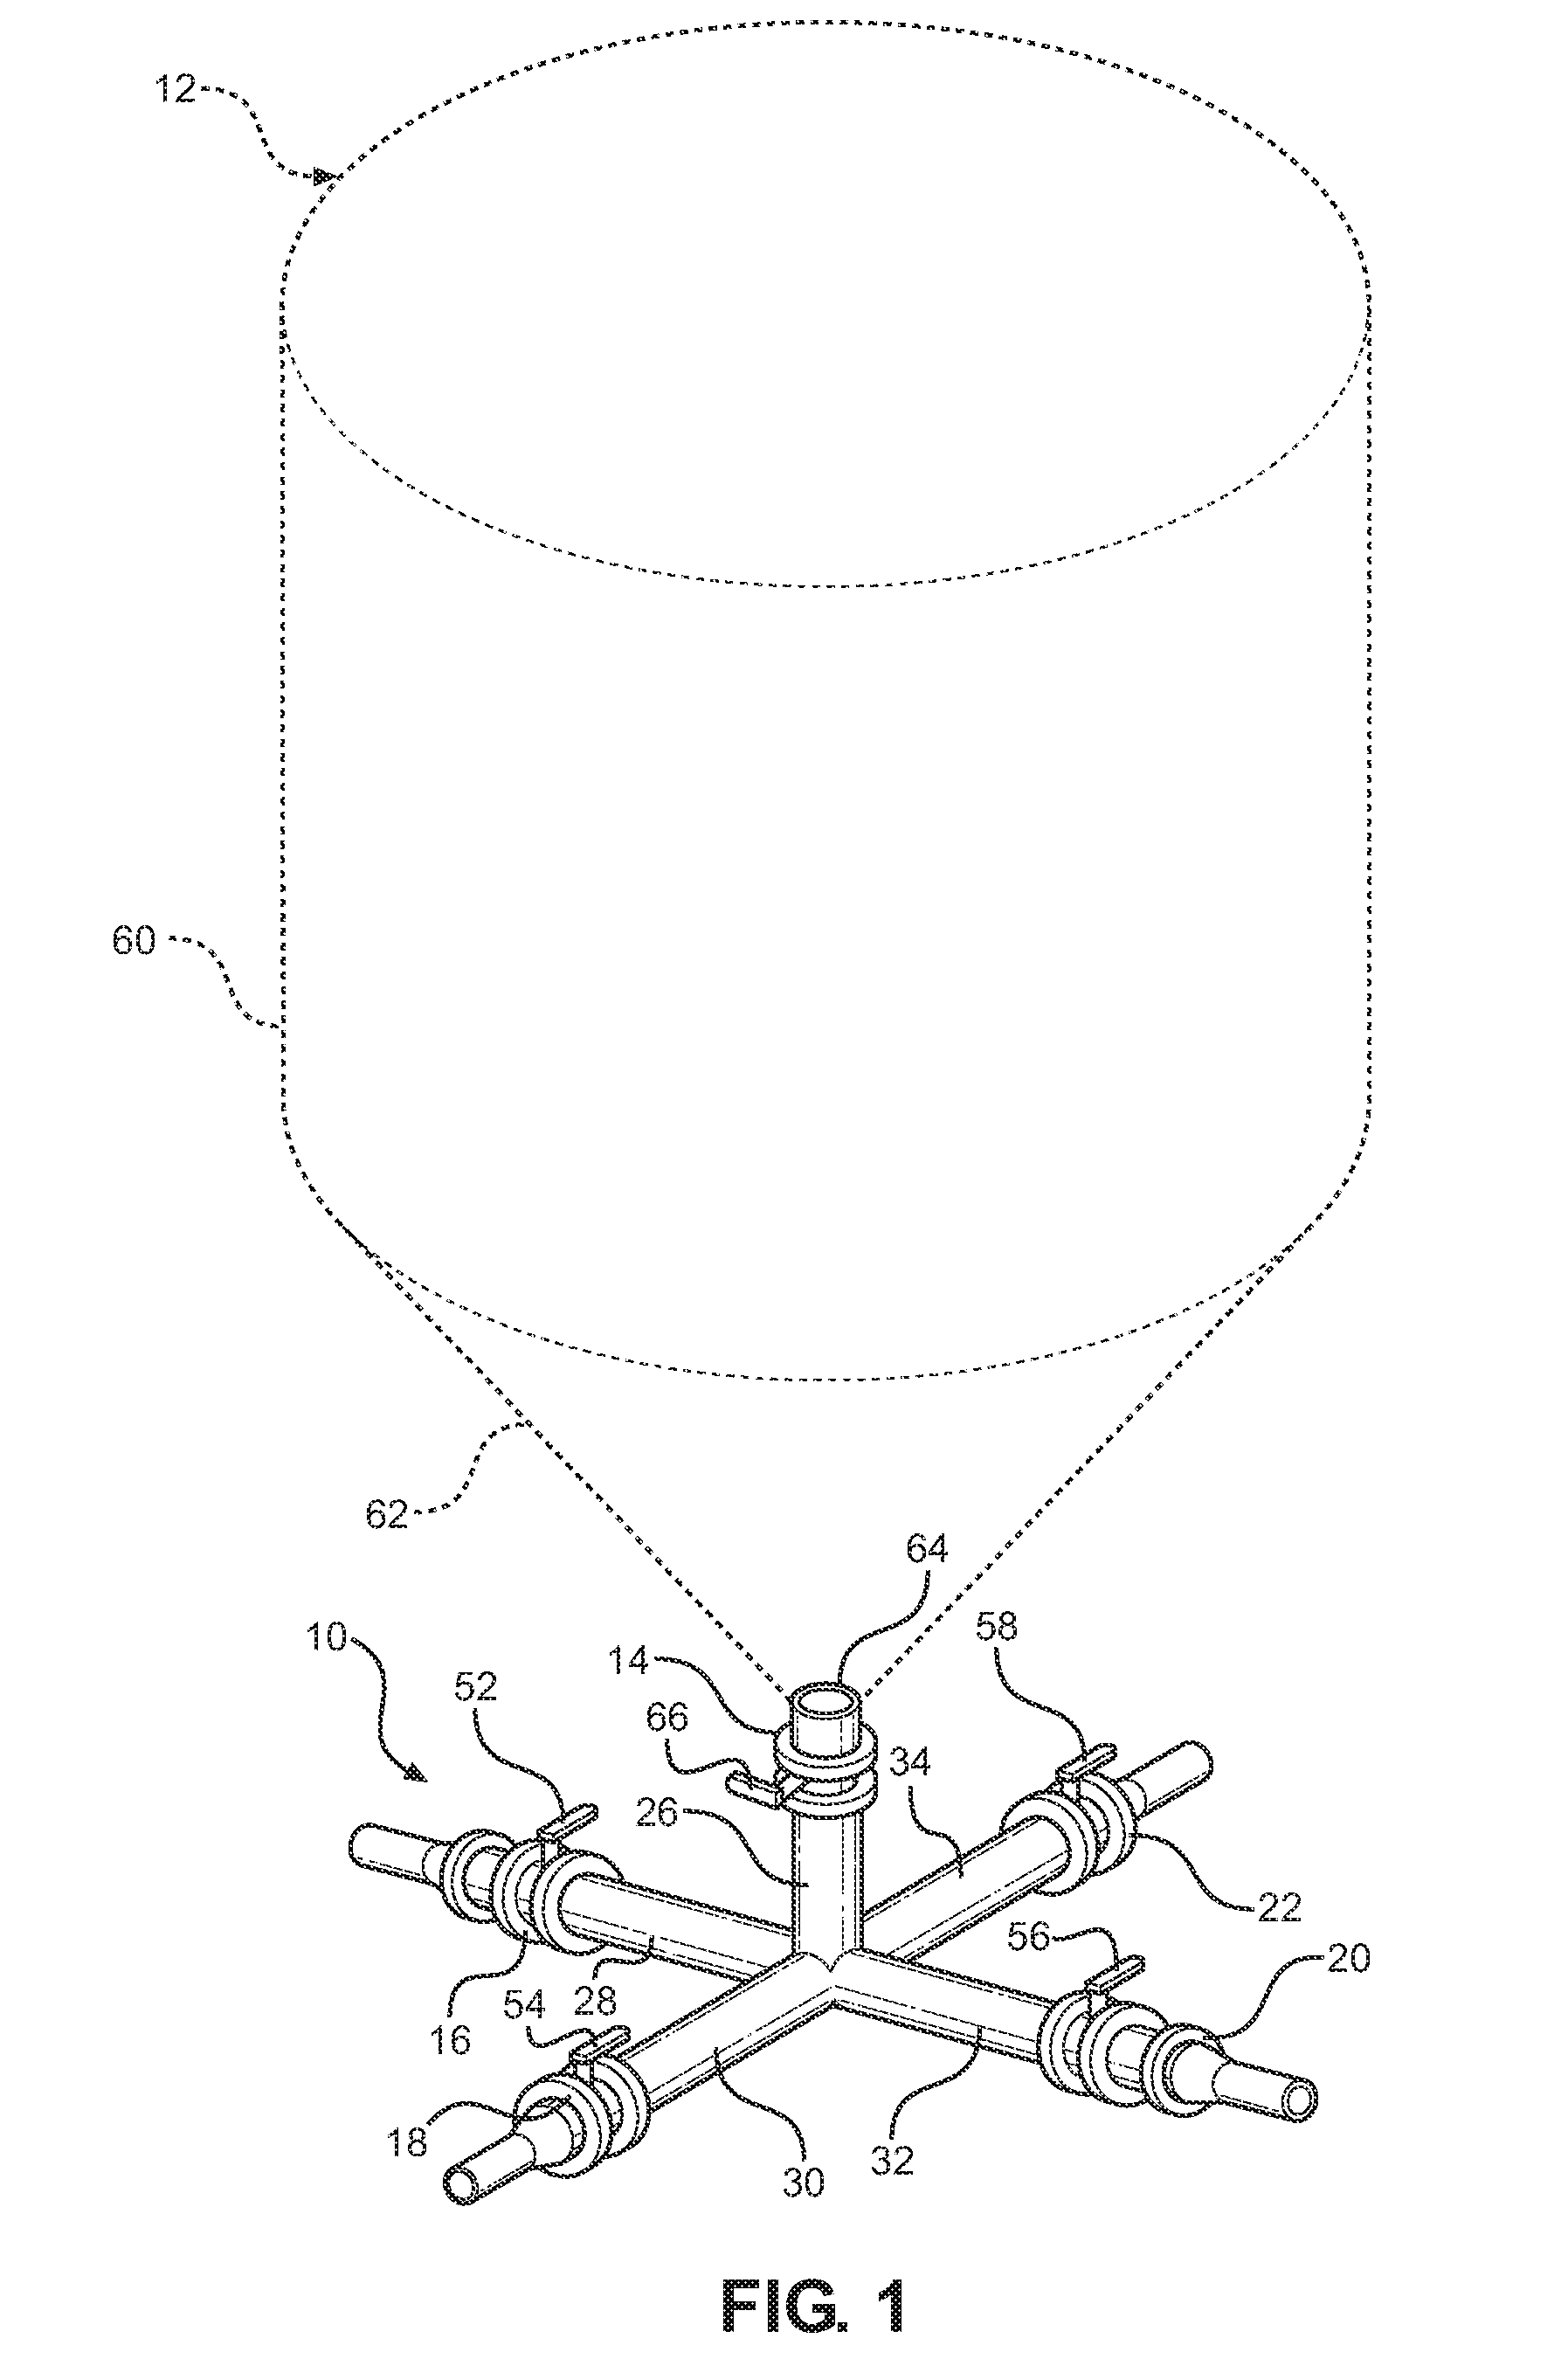 Device and Method for Multi-Path Flow From Vertical Hydraulic Tank